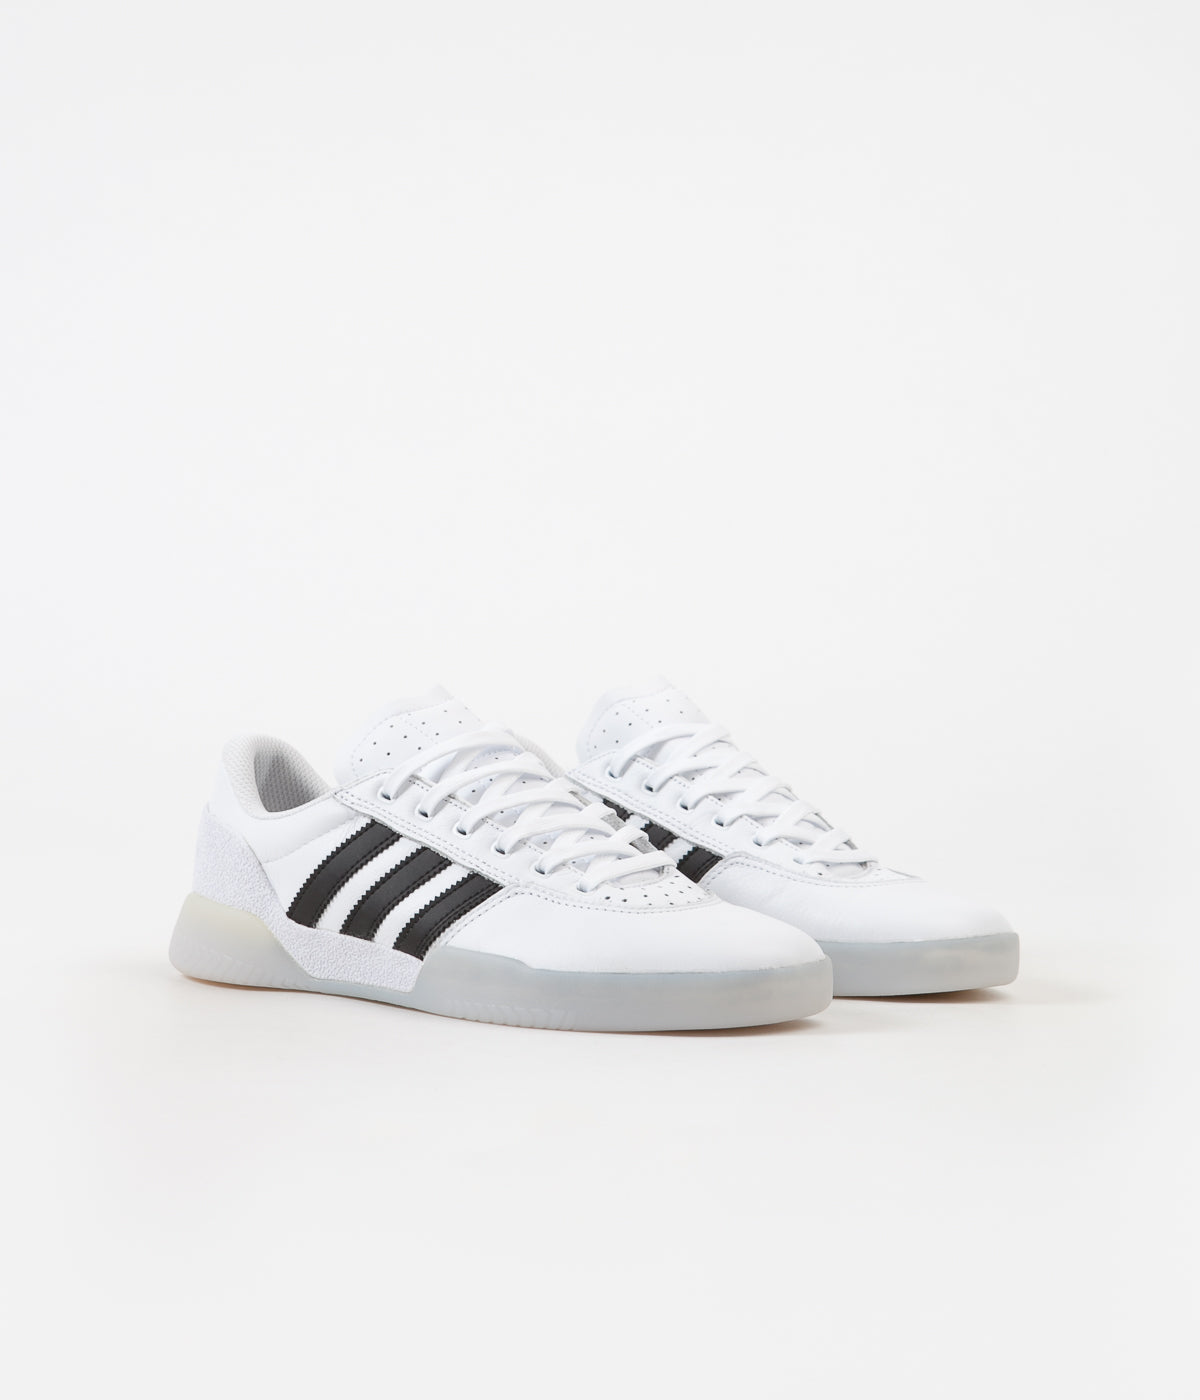 Adidas City Cup Shoes - White / Core Black / Light Solid Grey | Flatspot